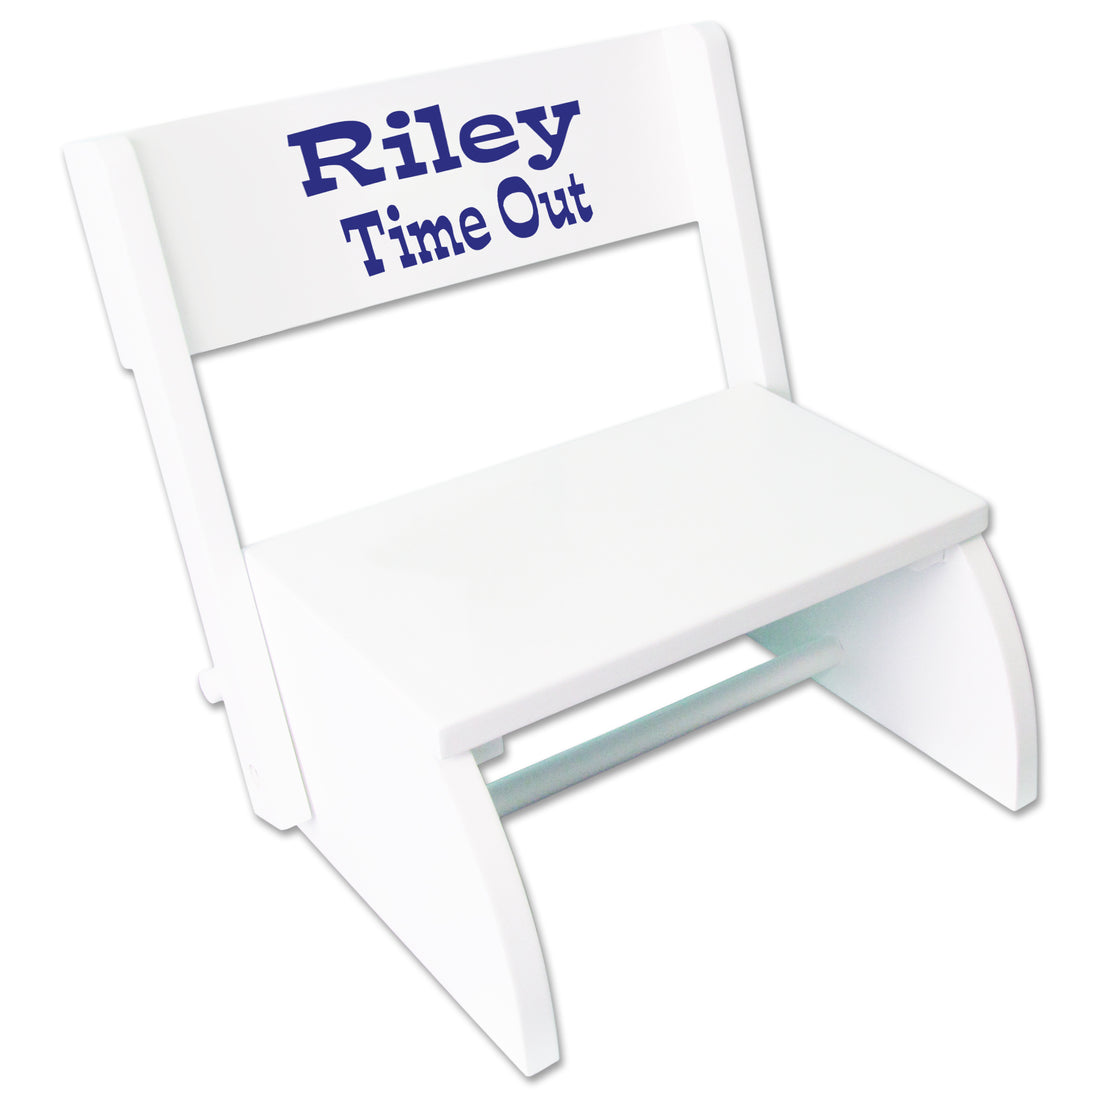 Personalized Child's White Flip Stool - Name Only